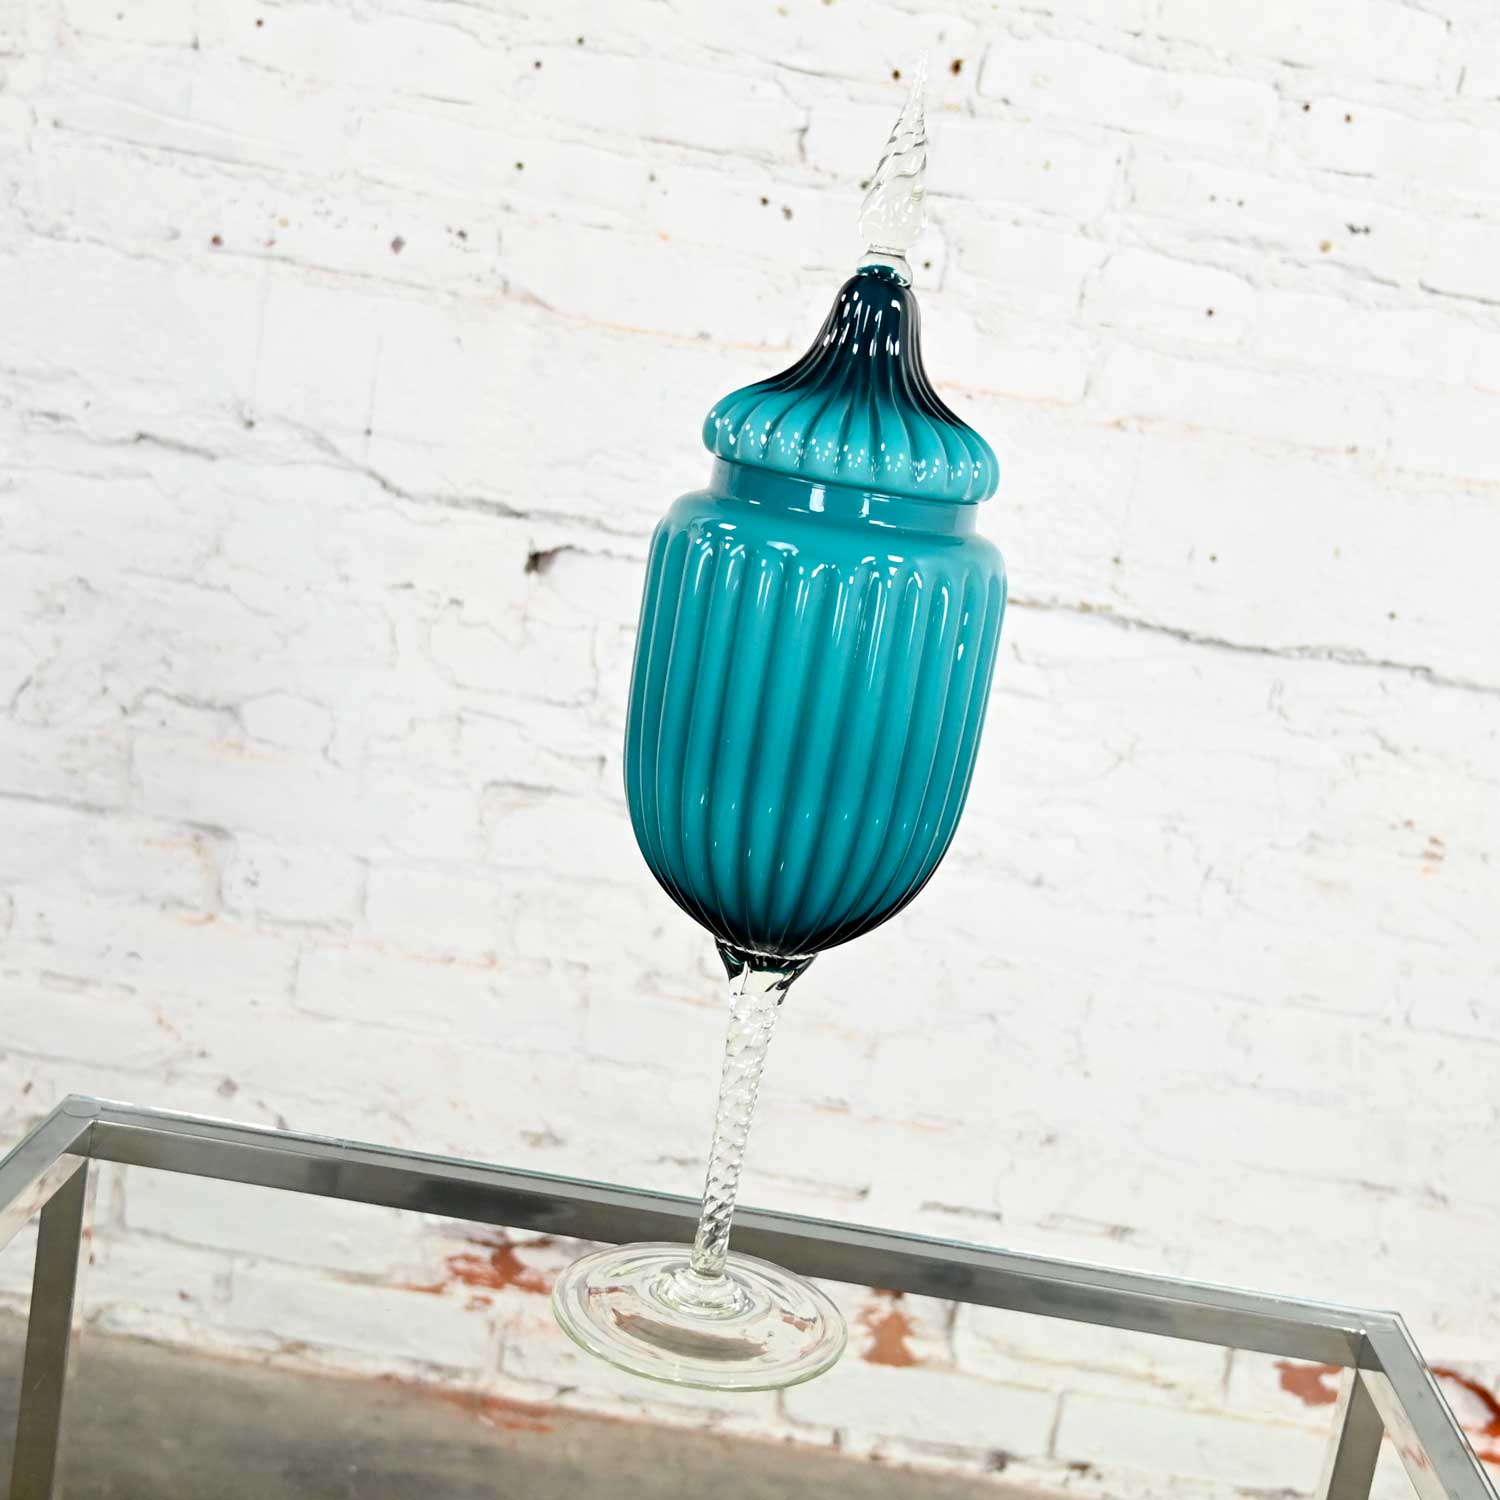 Empoli Italian Cased Glass Lidded Compote Circus Tent Jar in Peacock Blue